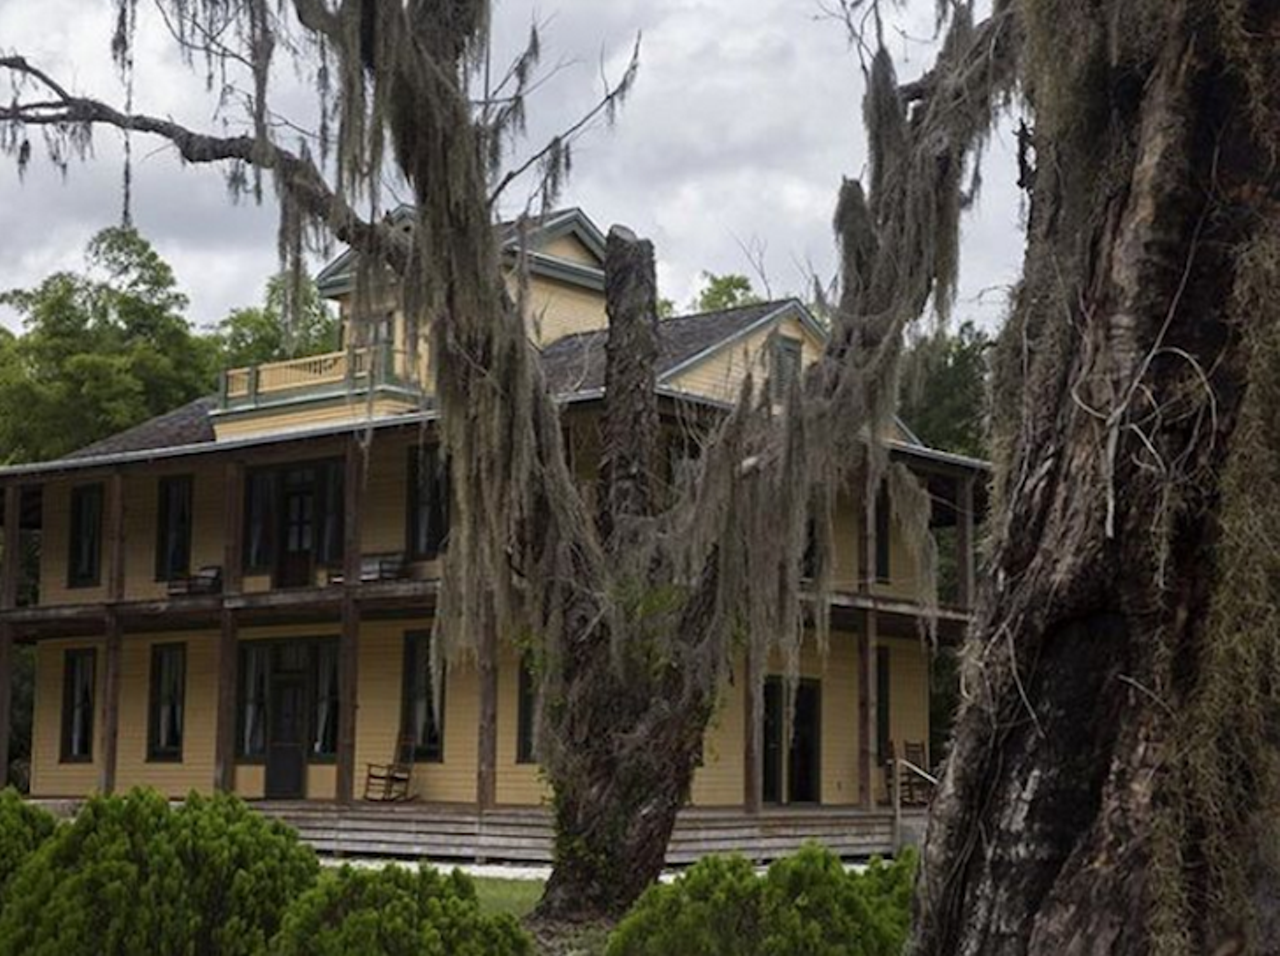 The Koreshan State Historic Site
Estero, FL
Settling back in 1894, this religious community believed that the Earth was hollow and humanity lived on the inside of its shell. Visitors are still able to visit the sight and the historic grounds; some may even dare to stay on its campground.
Photo via naplesnews/Instagram